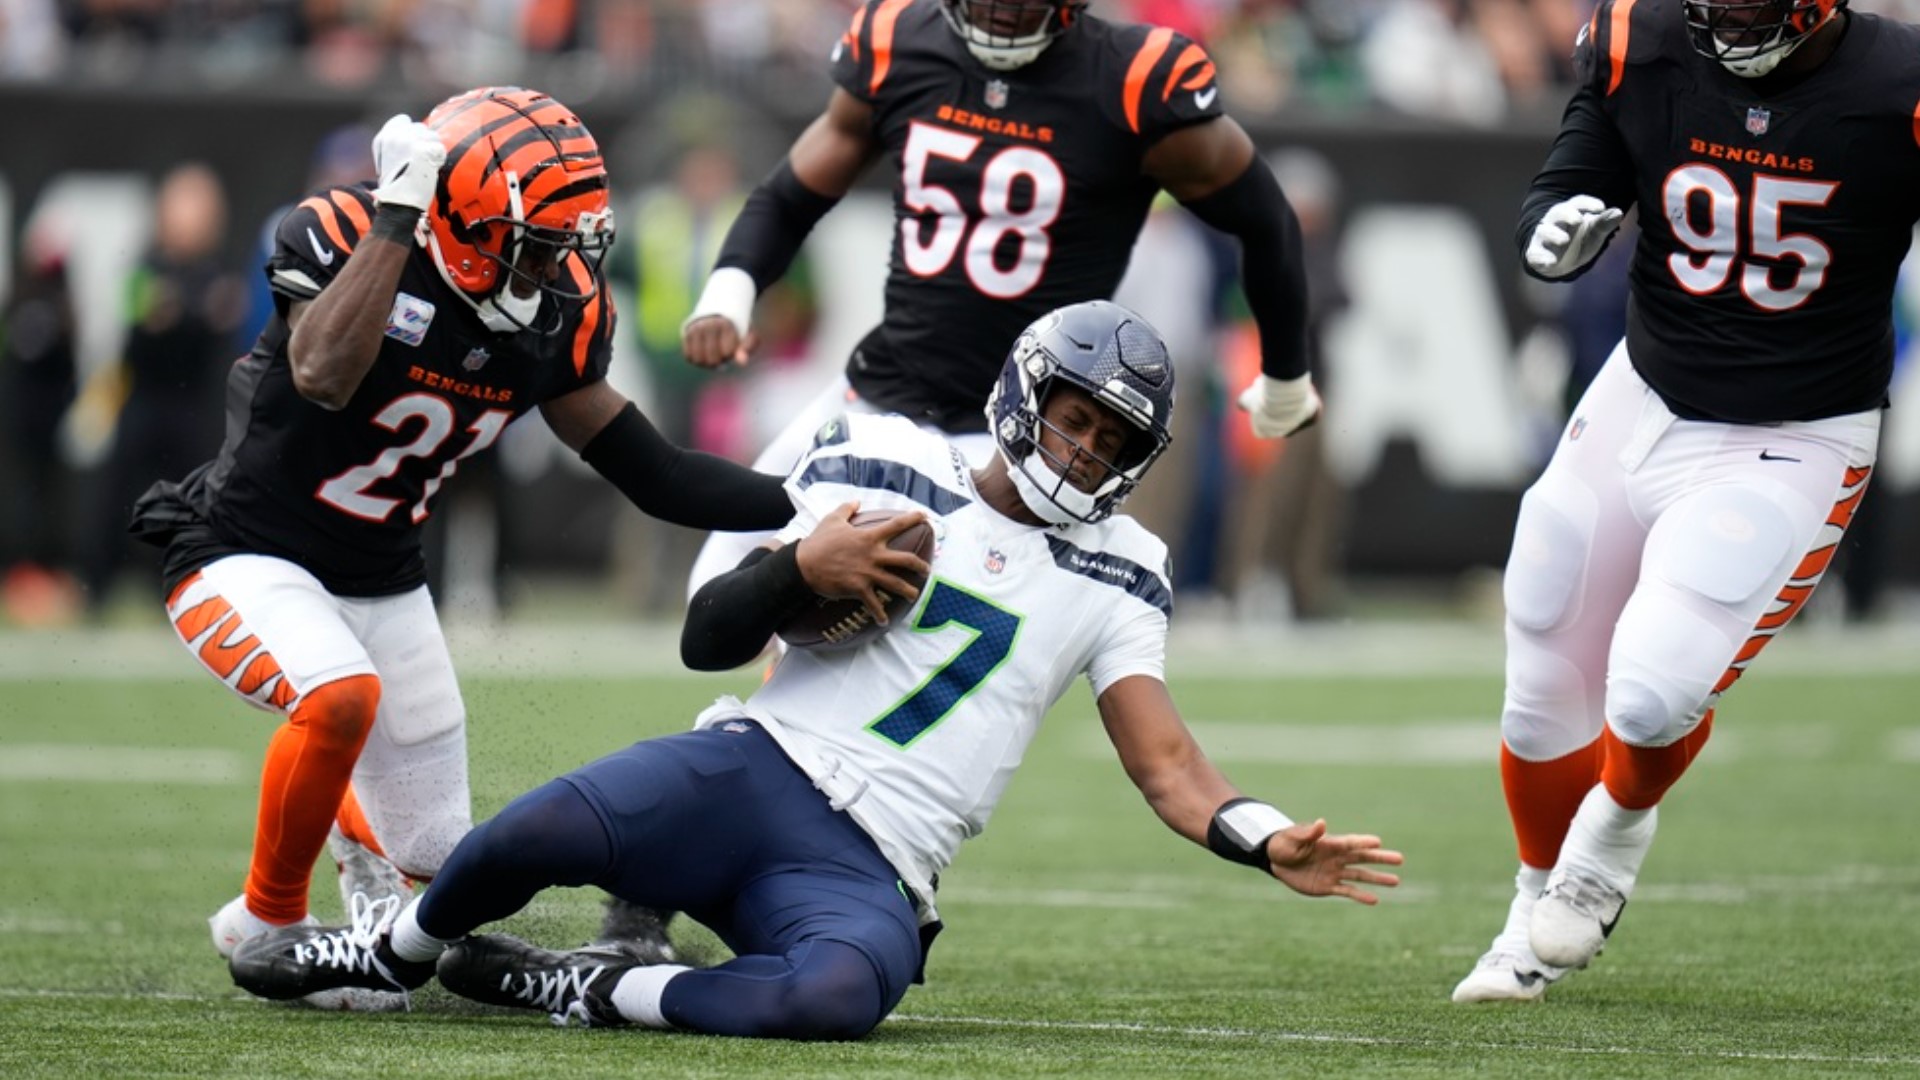 The close loss snapped the Seahawks' three-game winning streak.